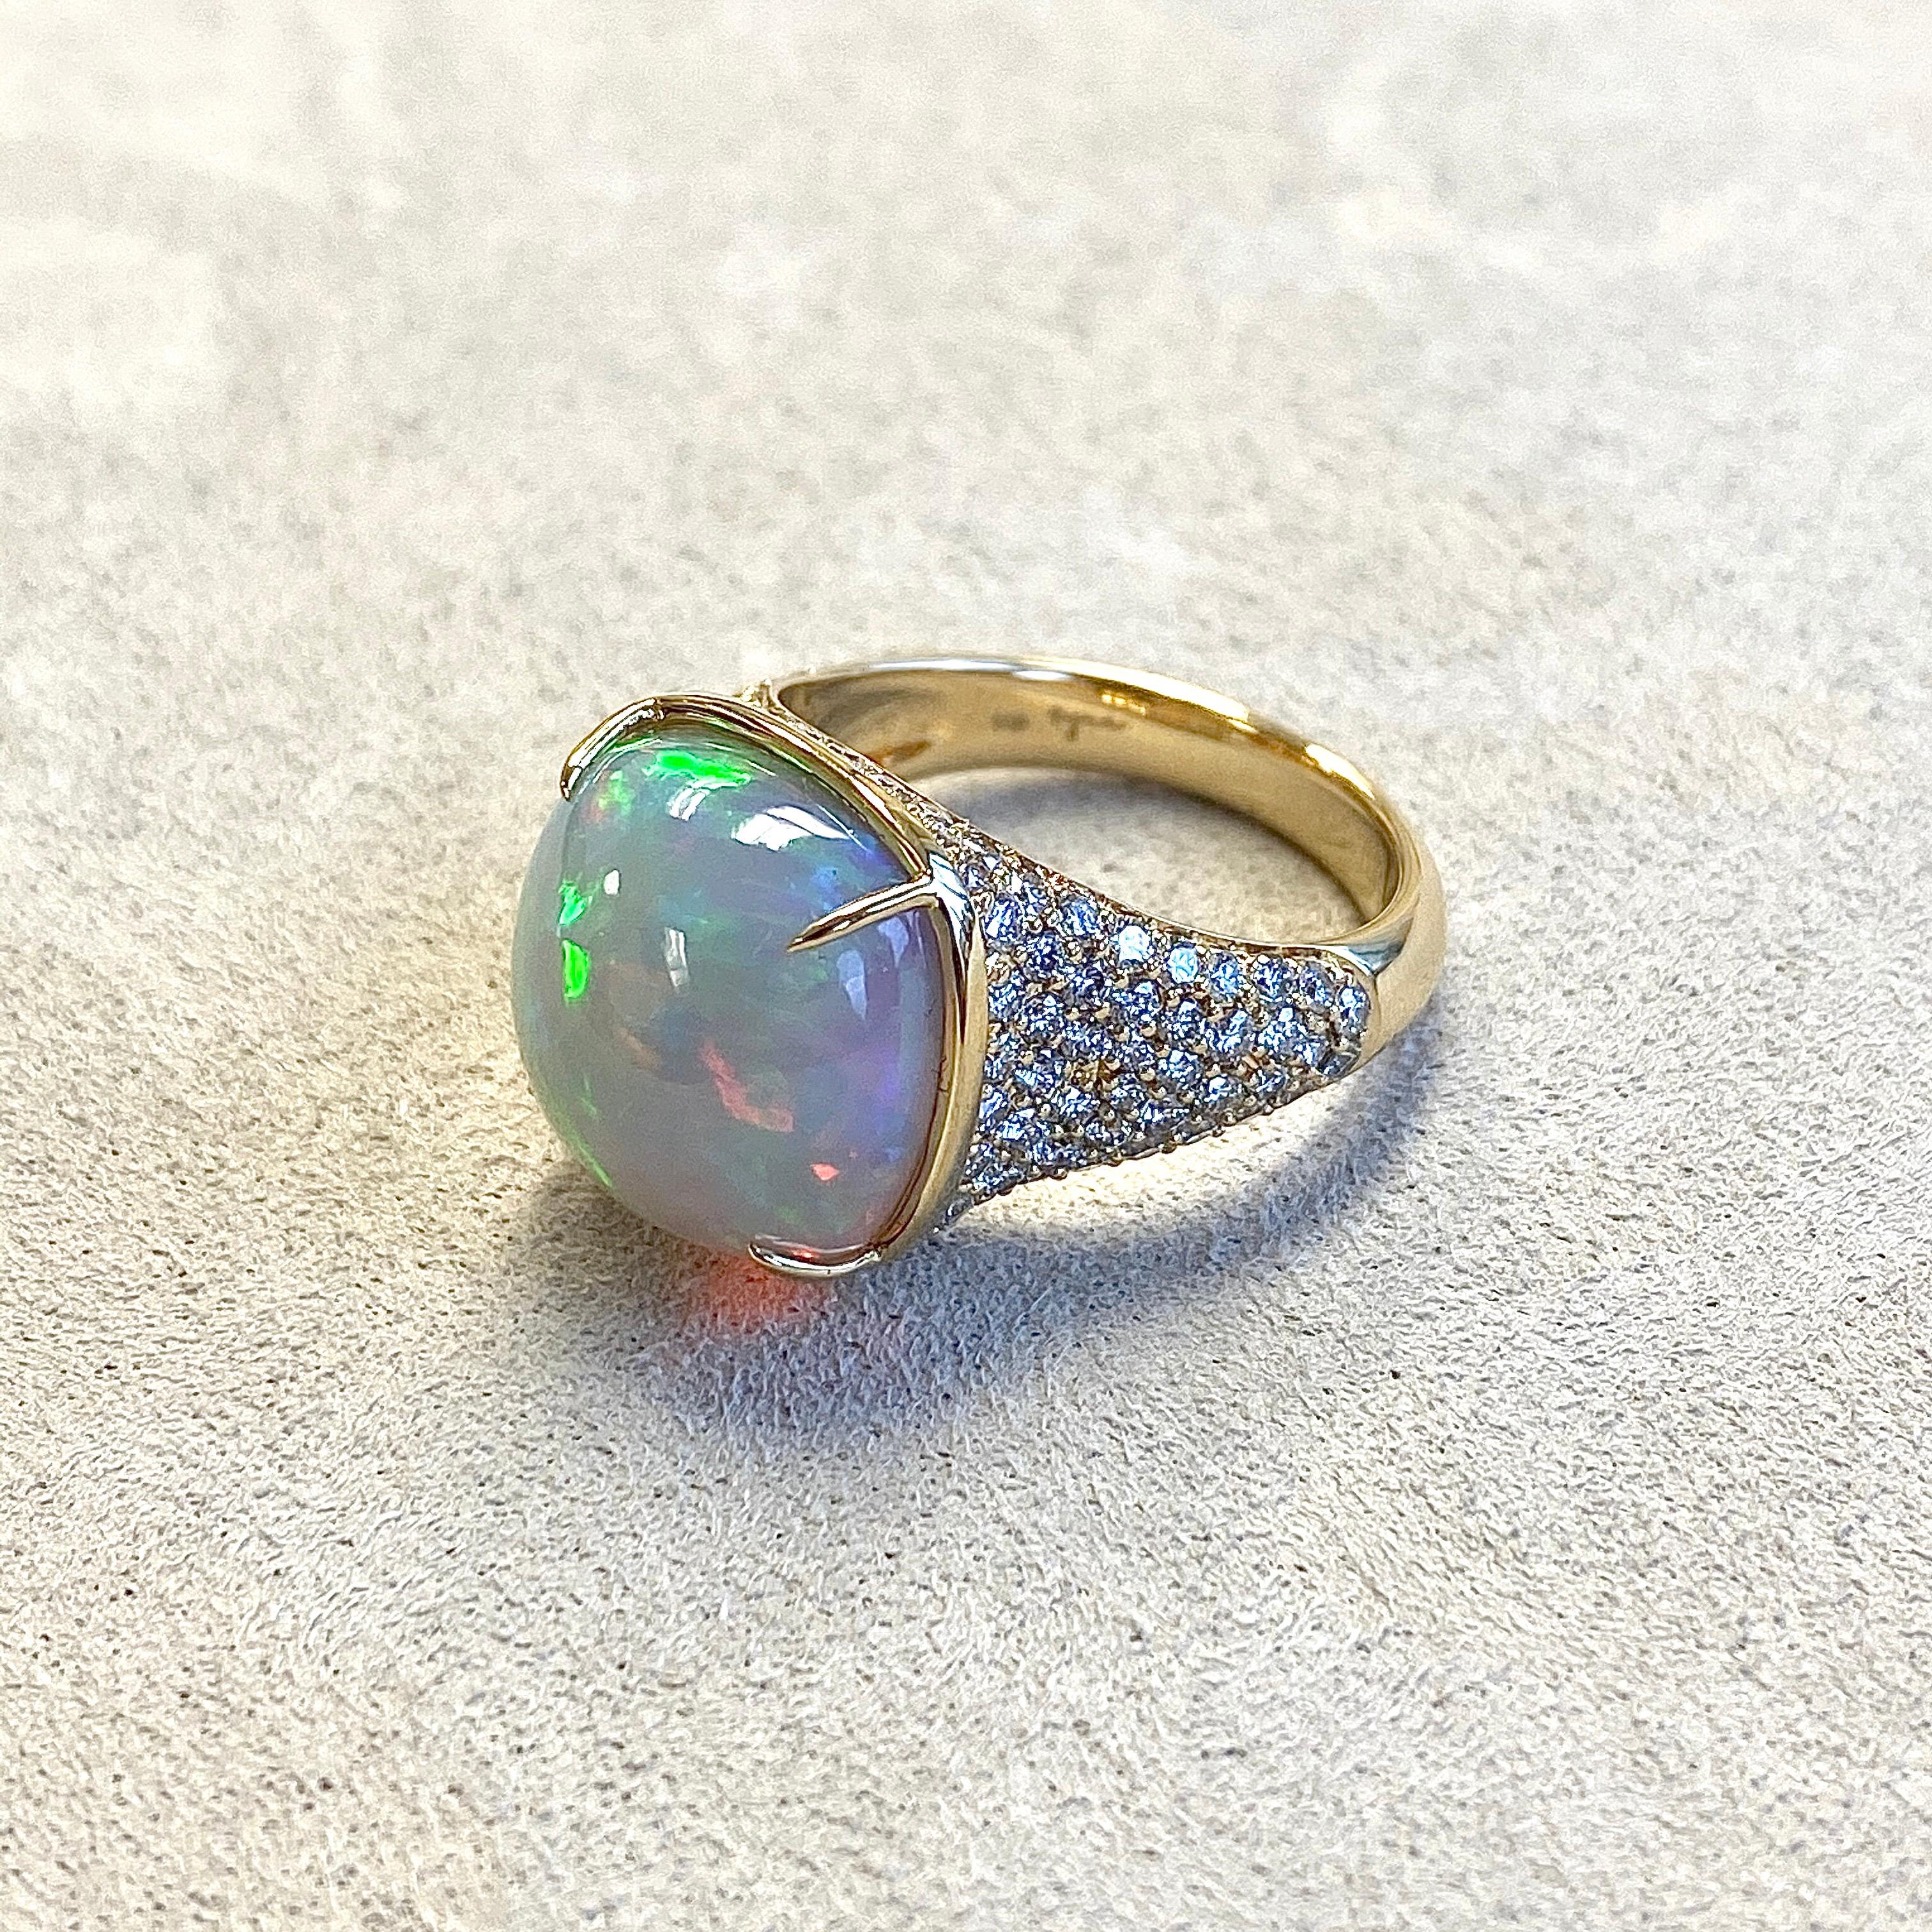 Created in 18 karat yellow gold
Ethiopian Opal 7 cts approx
Diamonds 1.25 cts approx
Ring size US 7, can be sized
One of a kind

About the Designers ~ Dharmesh & Namrata

Drawing inspiration from little things, Dharmesh & Namrata Kothari have